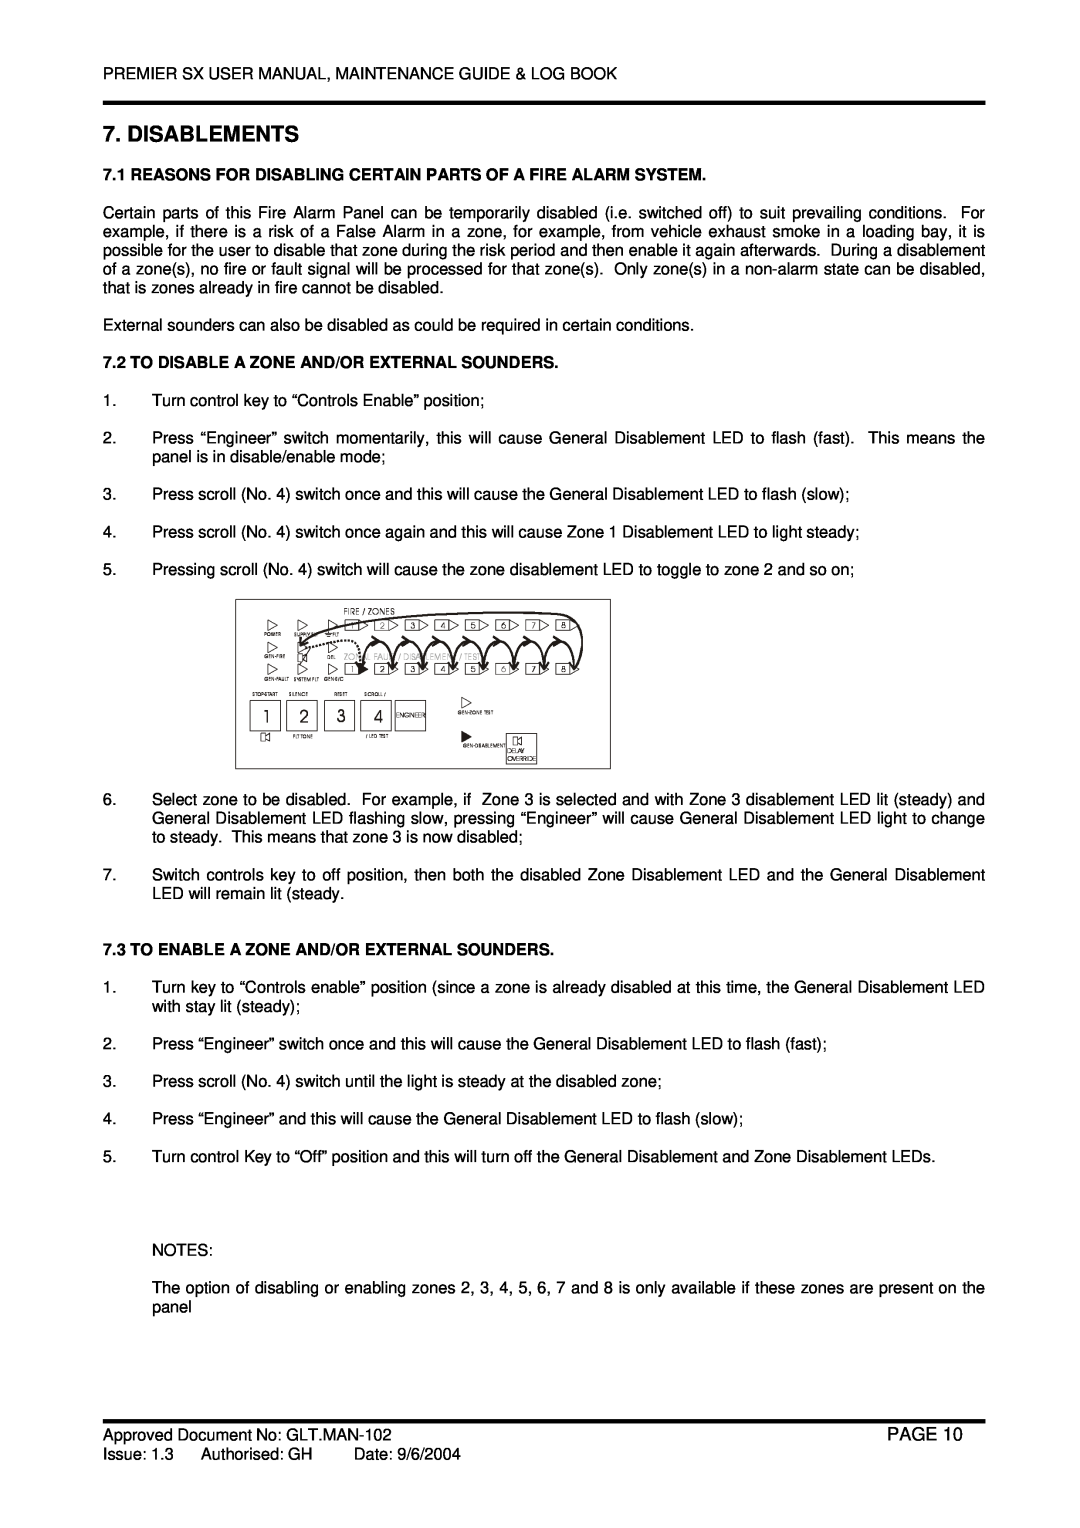 Premier Fire Alarm Control Panel user manual Disablements, Page, To Disable A Zone And/Or External Sounders 